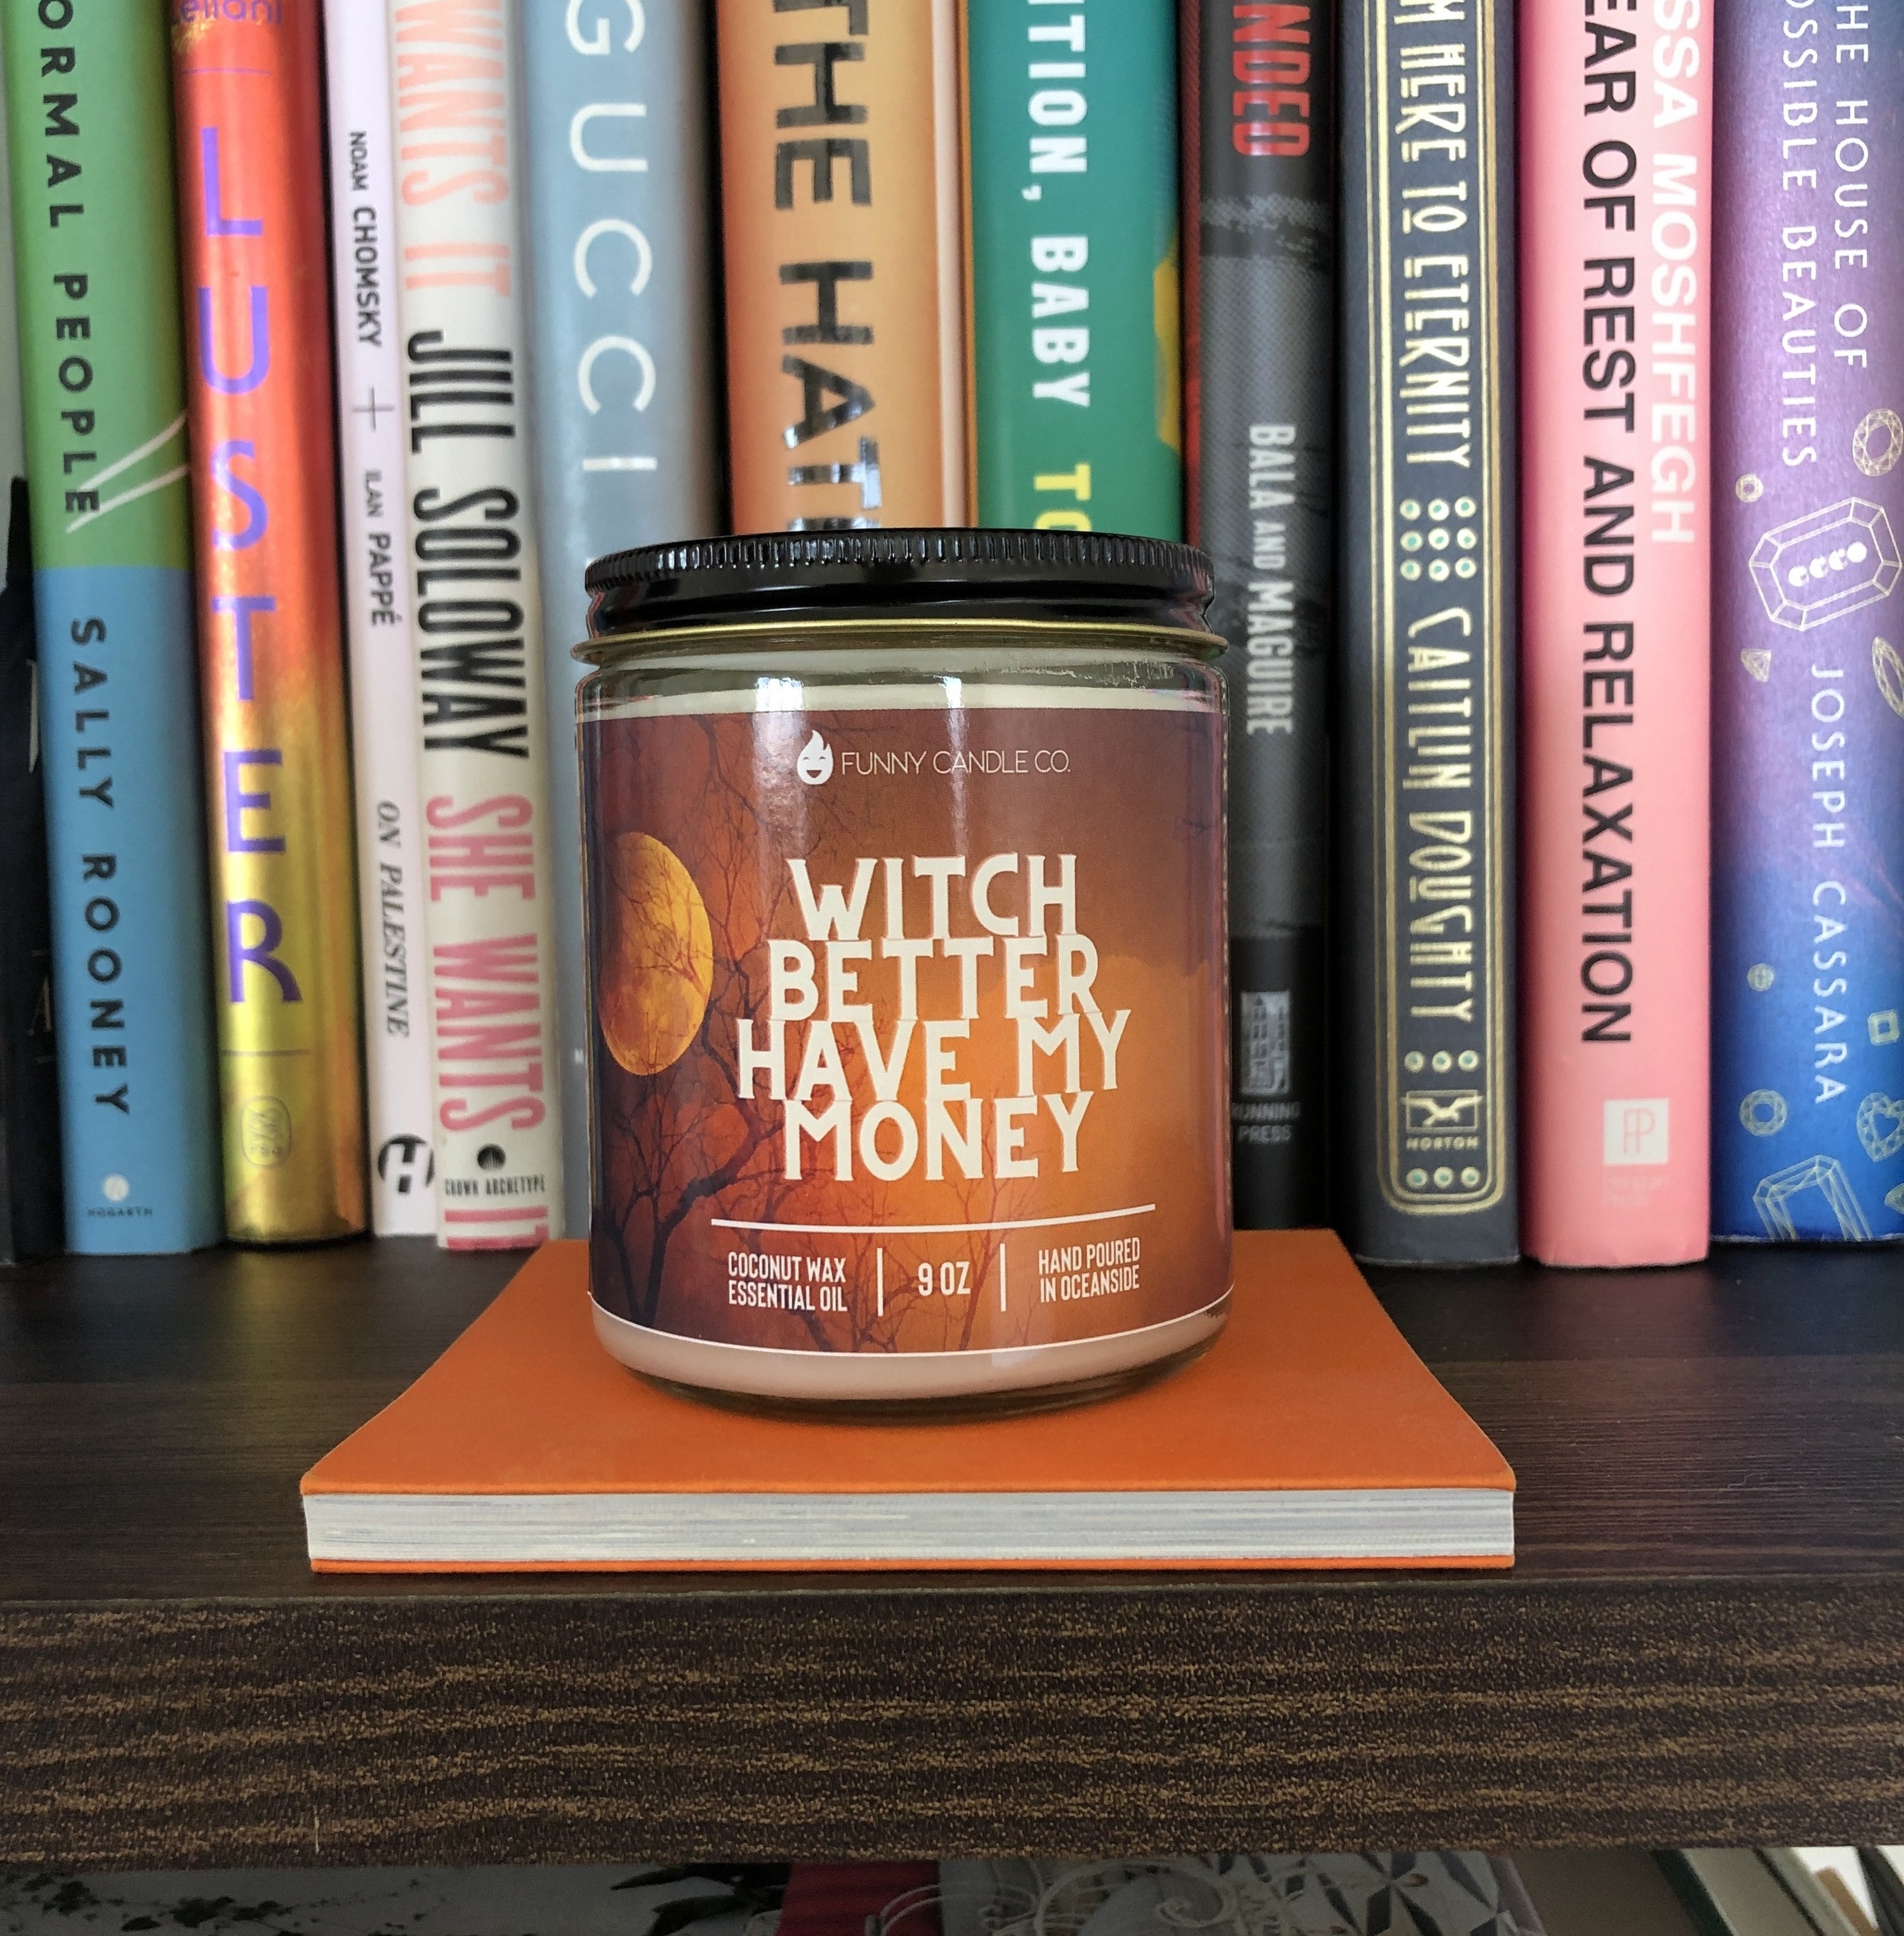 The candle reading &quot;witch better have my money&quot; is displayed on a bookshelf